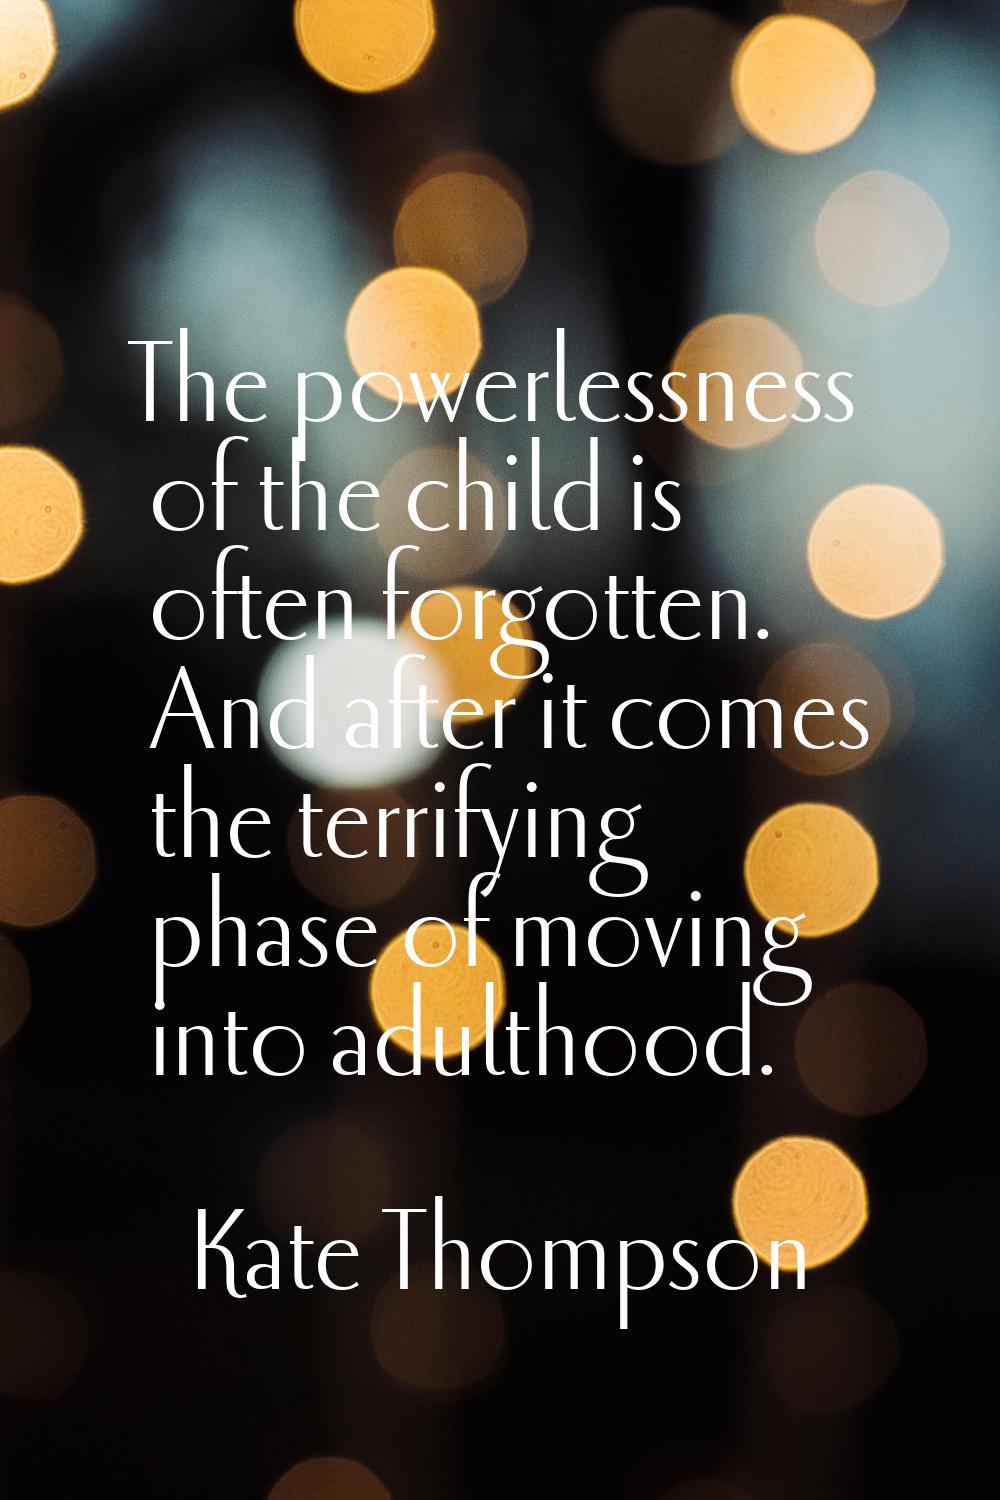 The powerlessness of the child is often forgotten. And after it comes the terrifying phase of movin